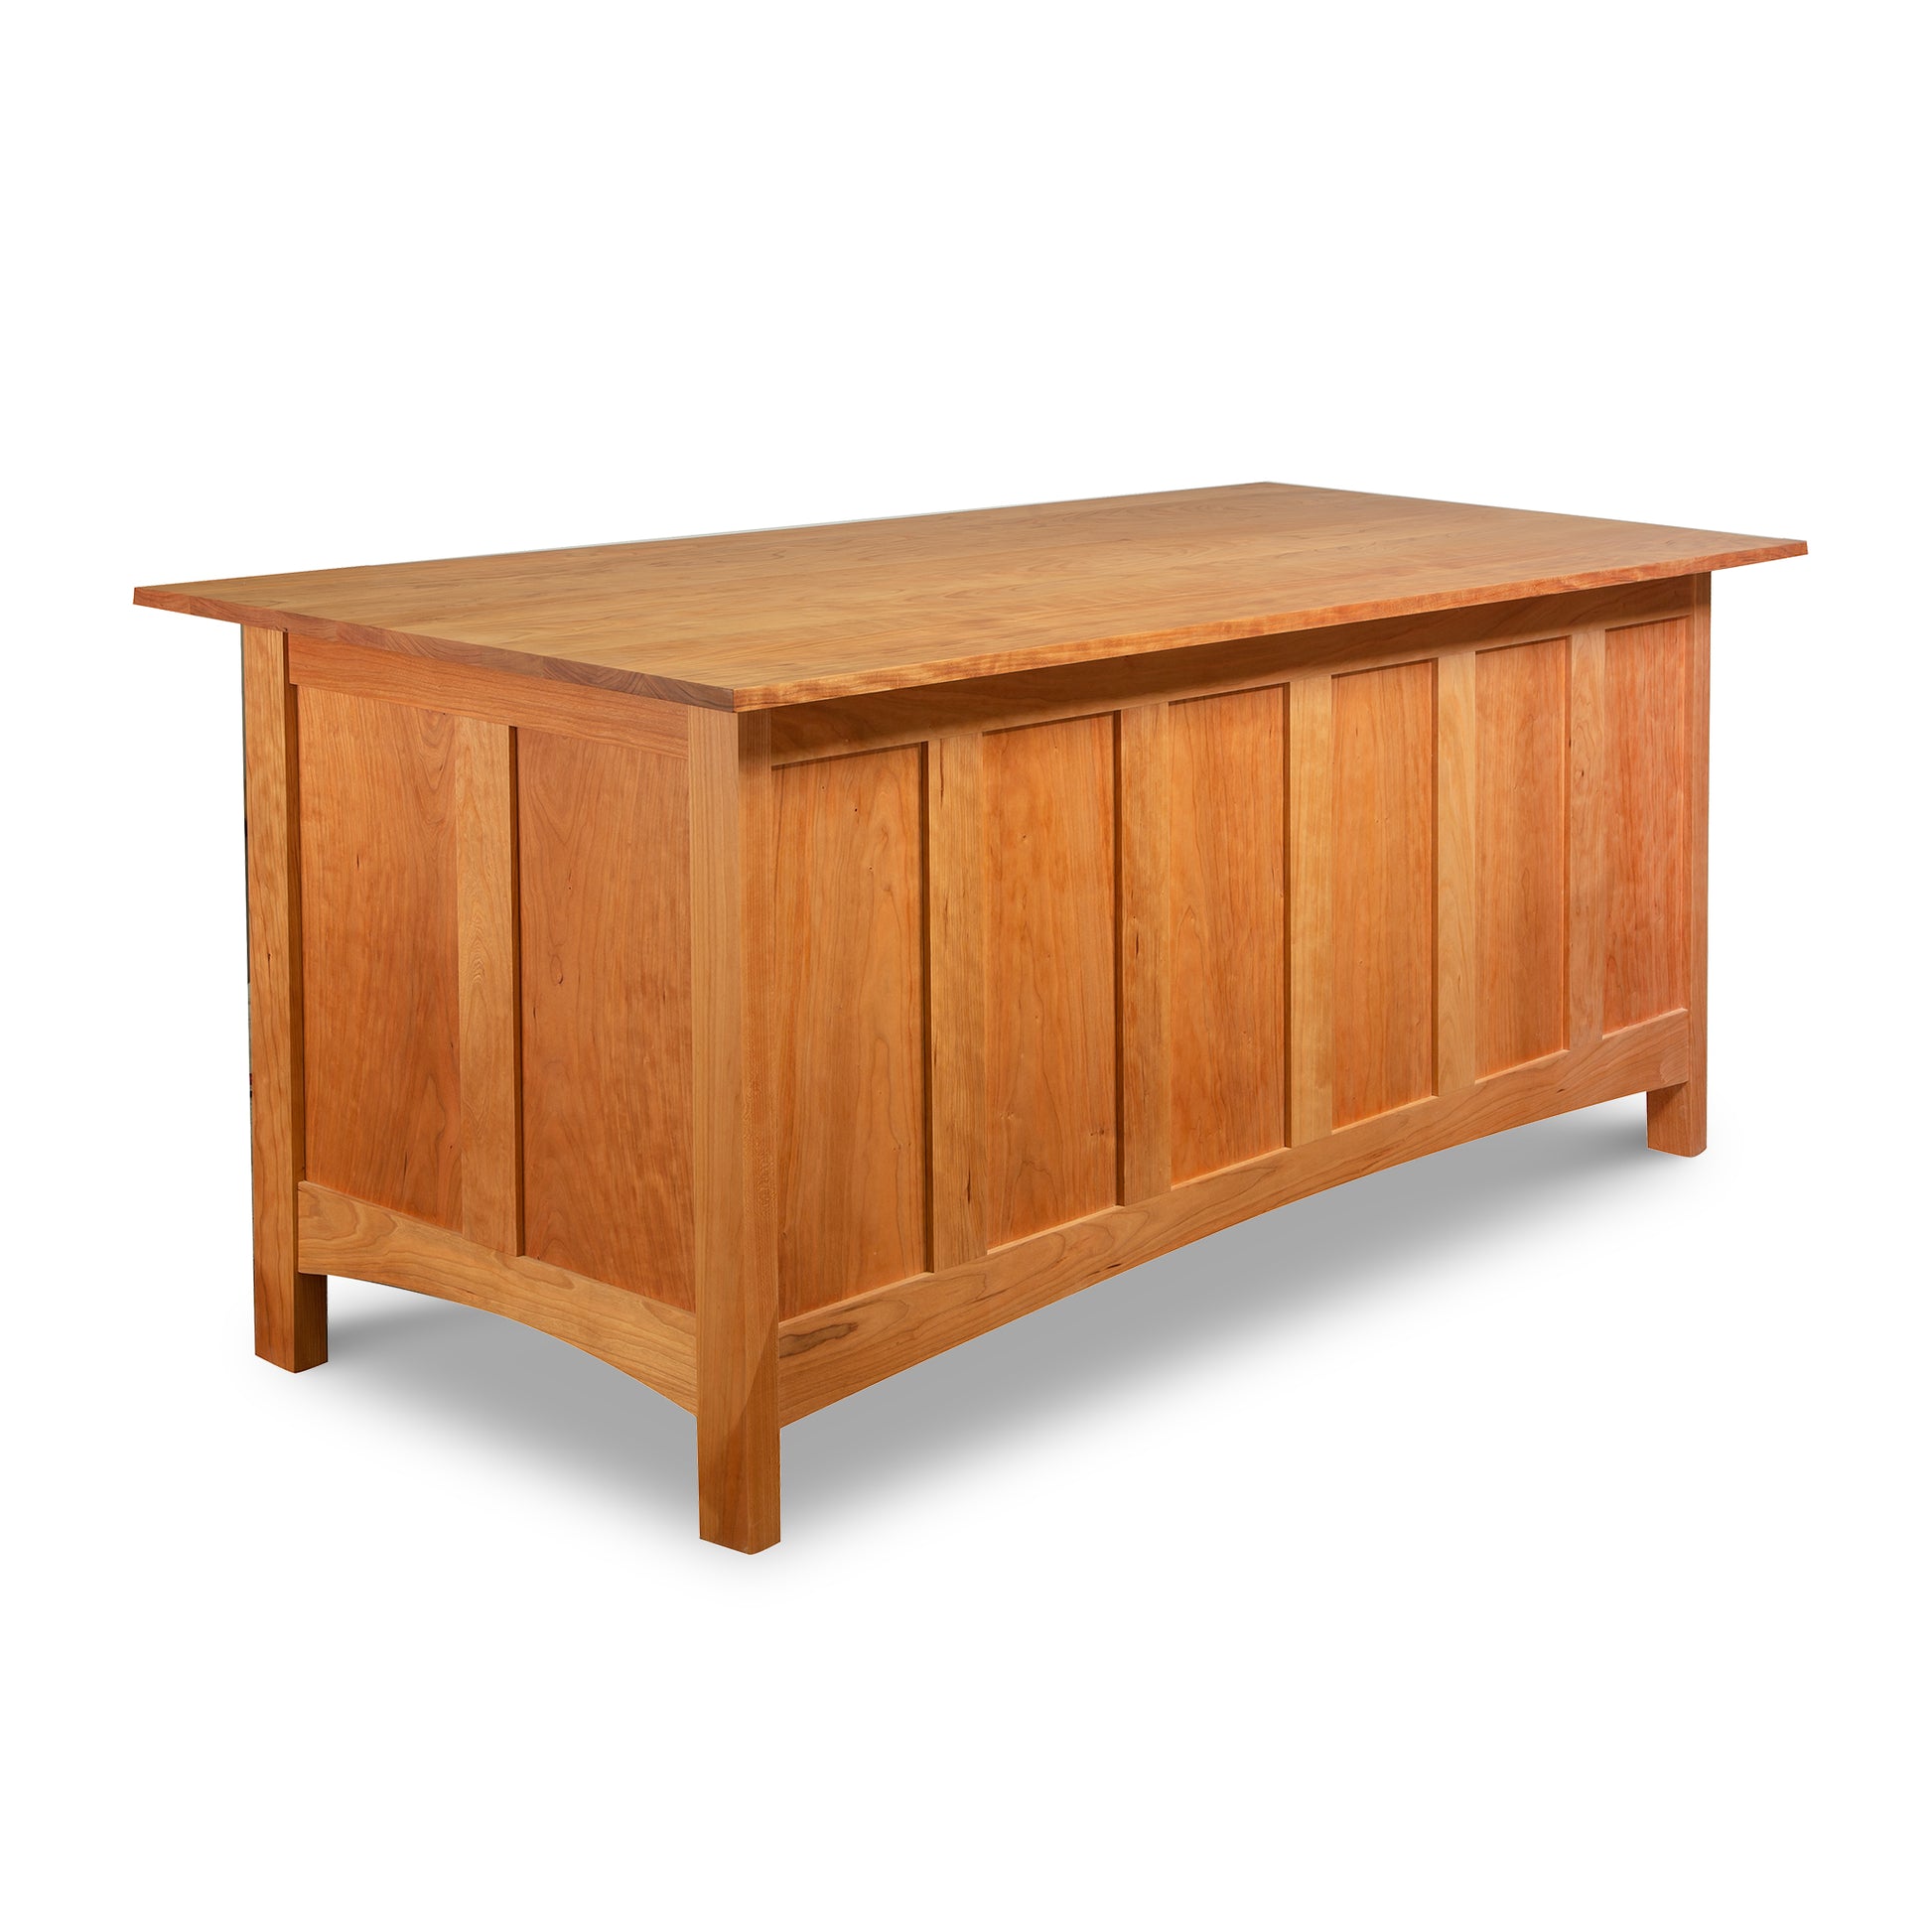 A Burlington Shaker Executive Desk - Floor Model with a wooden top, made by Vermont Furniture Designs.